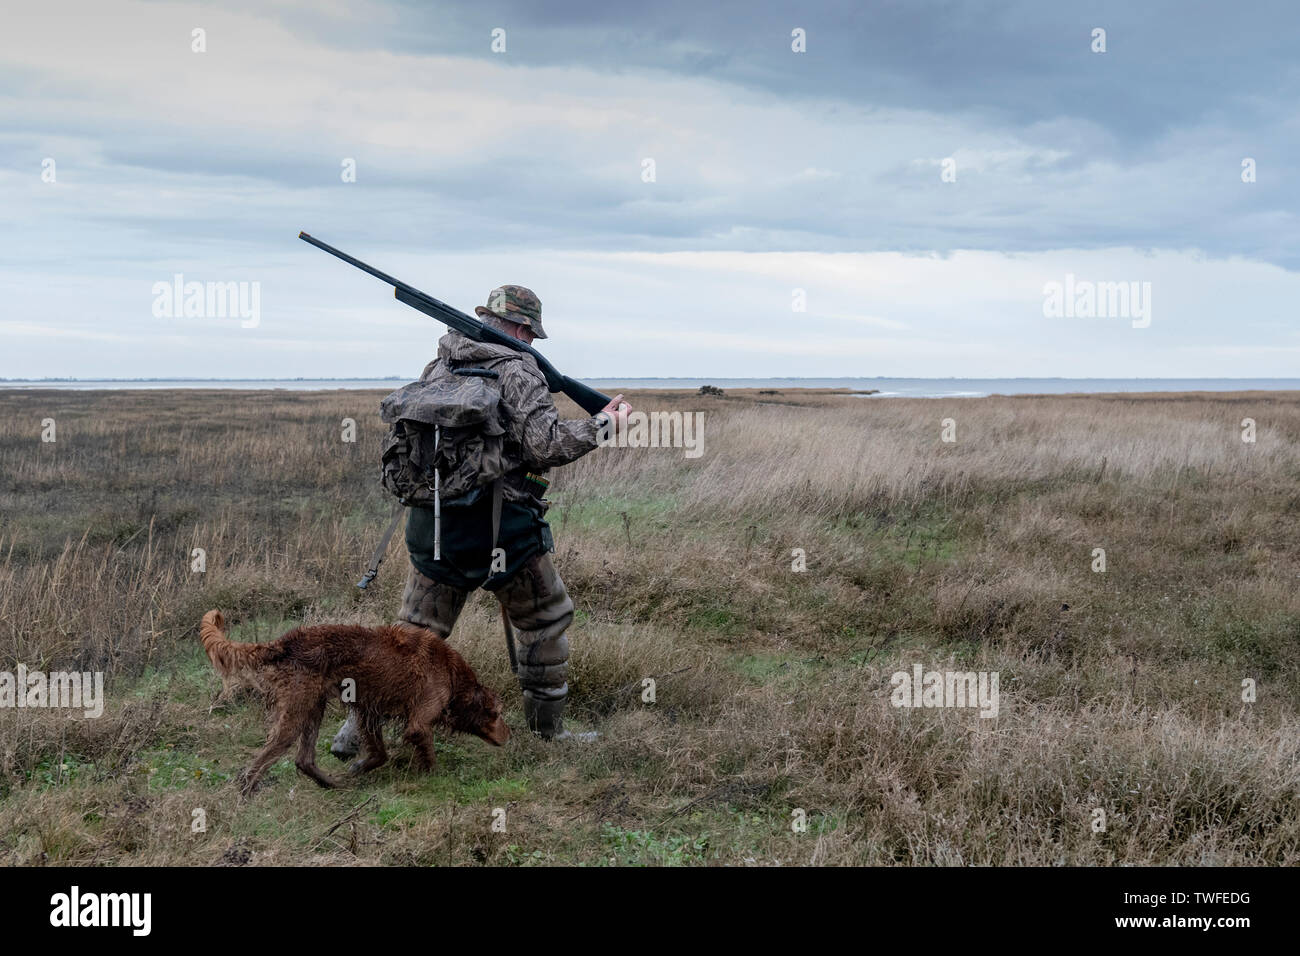 Wildfowling on the Lincolnshire Wash with shooter and gundog looking over the marshes with storm clouds and rain. Stock Photo